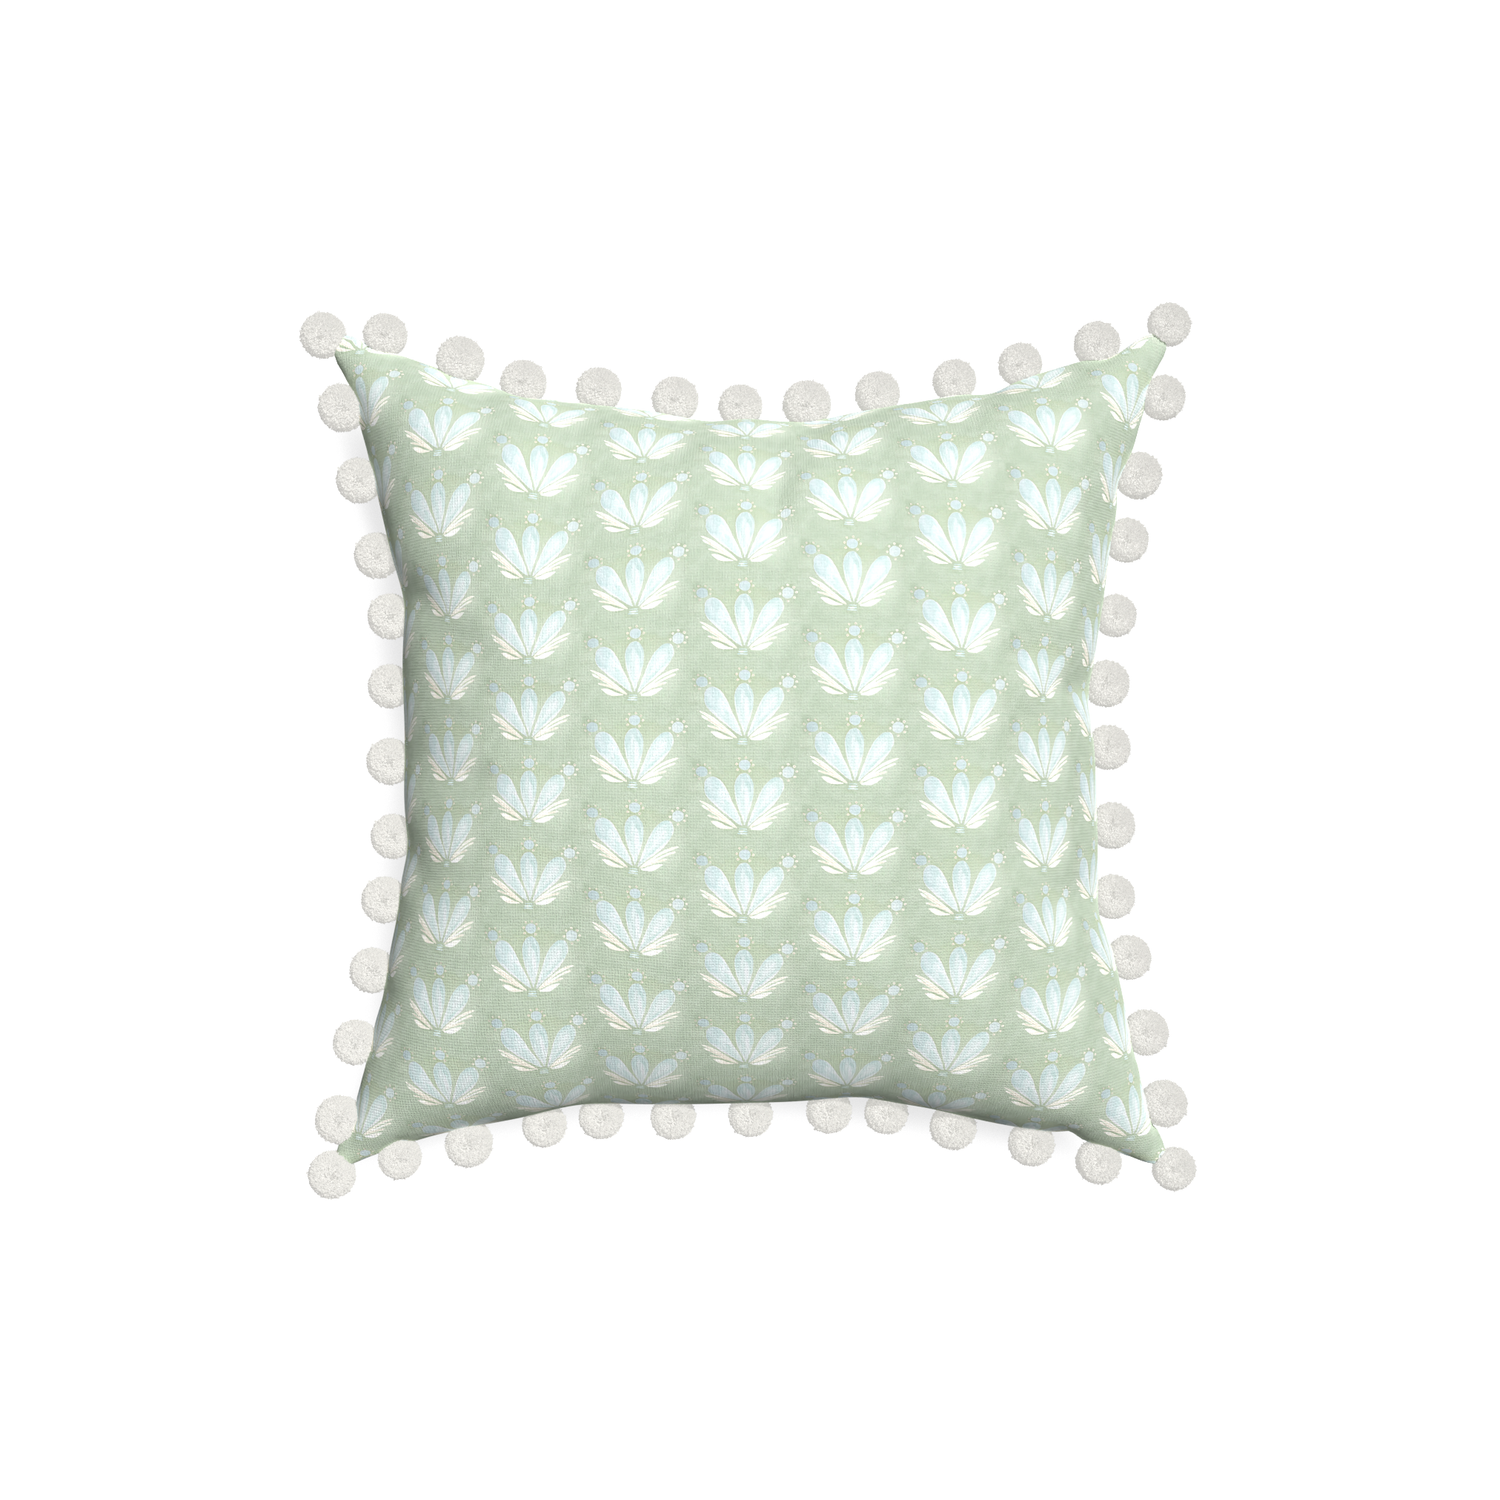 18-square serena sea salt custom blue & green floral drop repeatpillow with snow pom pom on white background